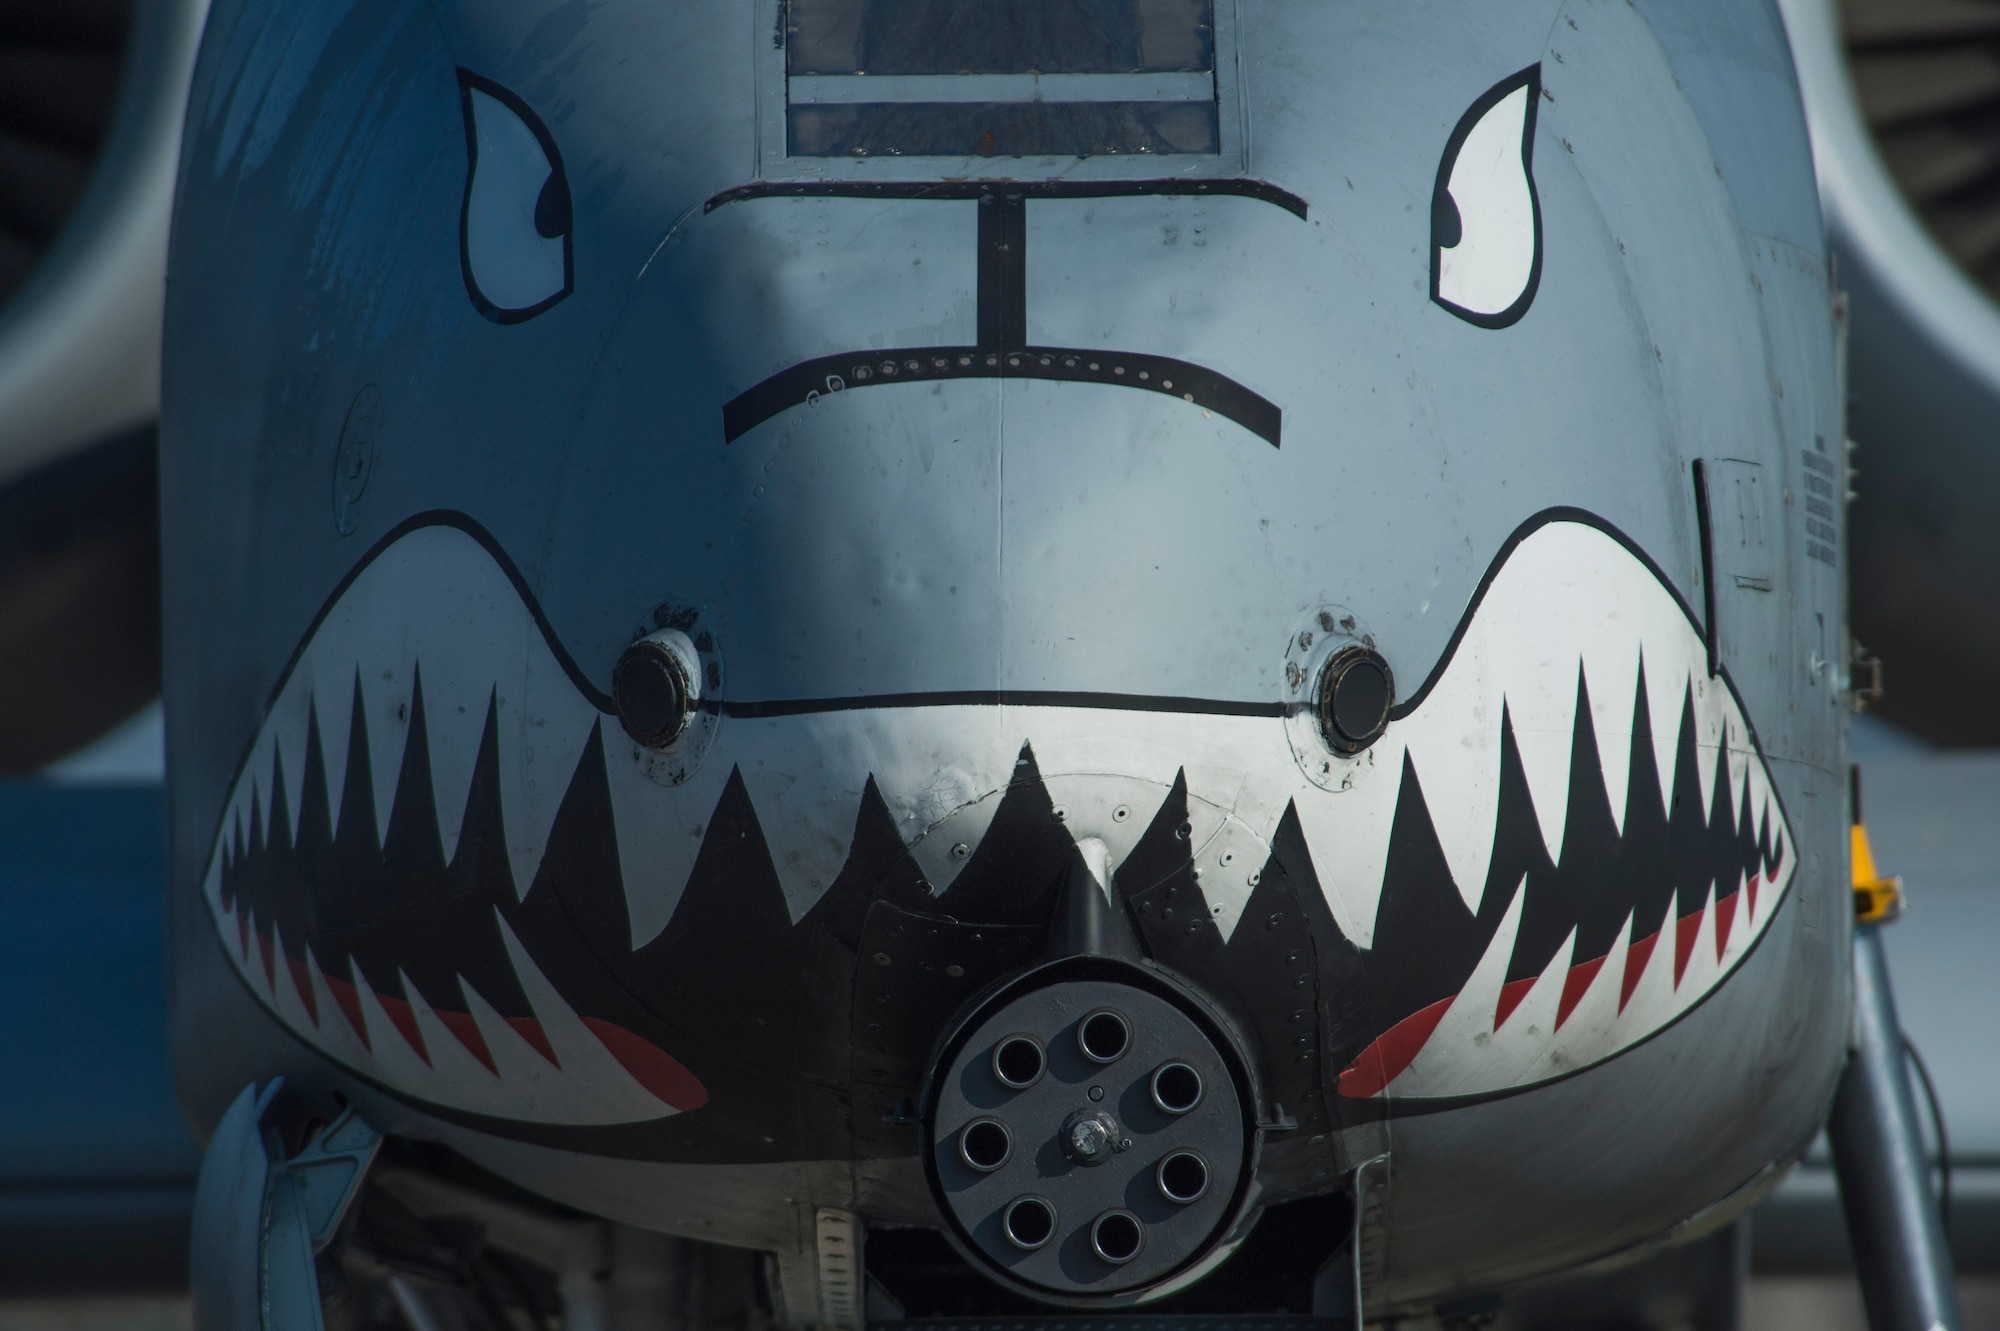 The nose of a U.S. Air Force A-10 Thunderbolt II displays a painted set of eyes and teeth over the aircraft’s 30mm GAU-8 Avenger rotary cannon during the 74th Expeditionary Fighter Squadron’s deployment in support of Operation Atlantic Resolve at Graf Ignatievo, Bulgaria, March 18, 2016.  The painting dates back throughout aviation history, where some cultures believed the paint intimidated opponents or warded off evil spirits aimed at disrupting the flight. (U.S. Air Force photo by Staff Sgt. Joe W. McFadden/Released)